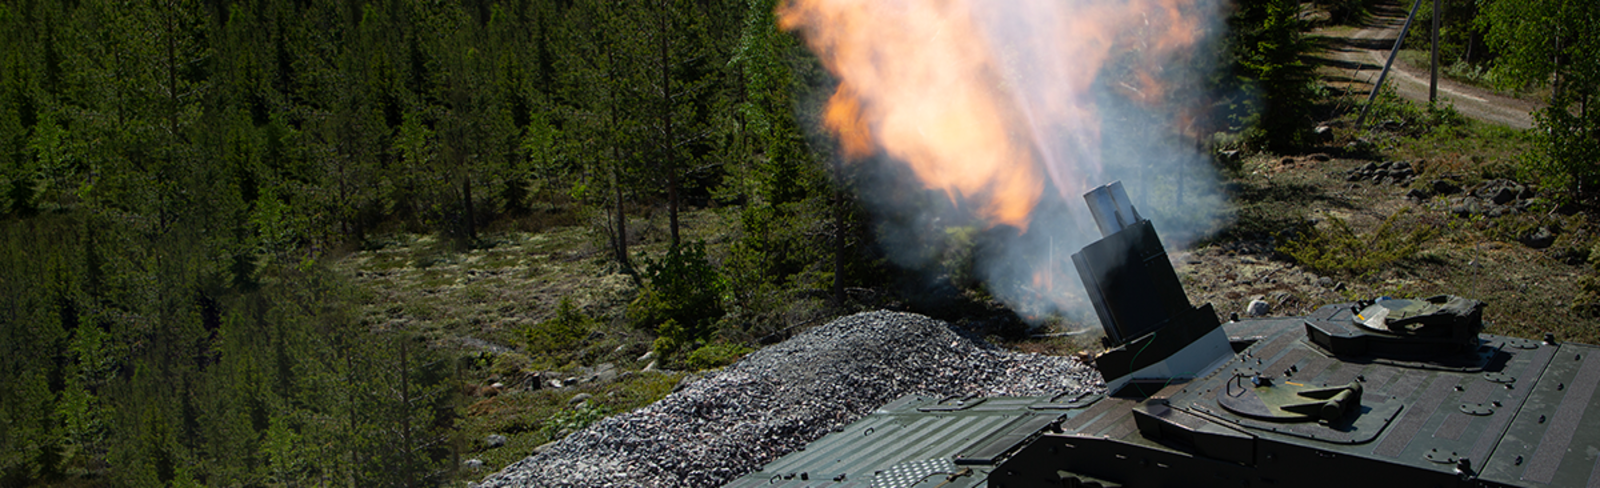 Bae Systems Receives Contract For 20 Additional Cv90 Mjölner Mortar Systems For Swedish Army